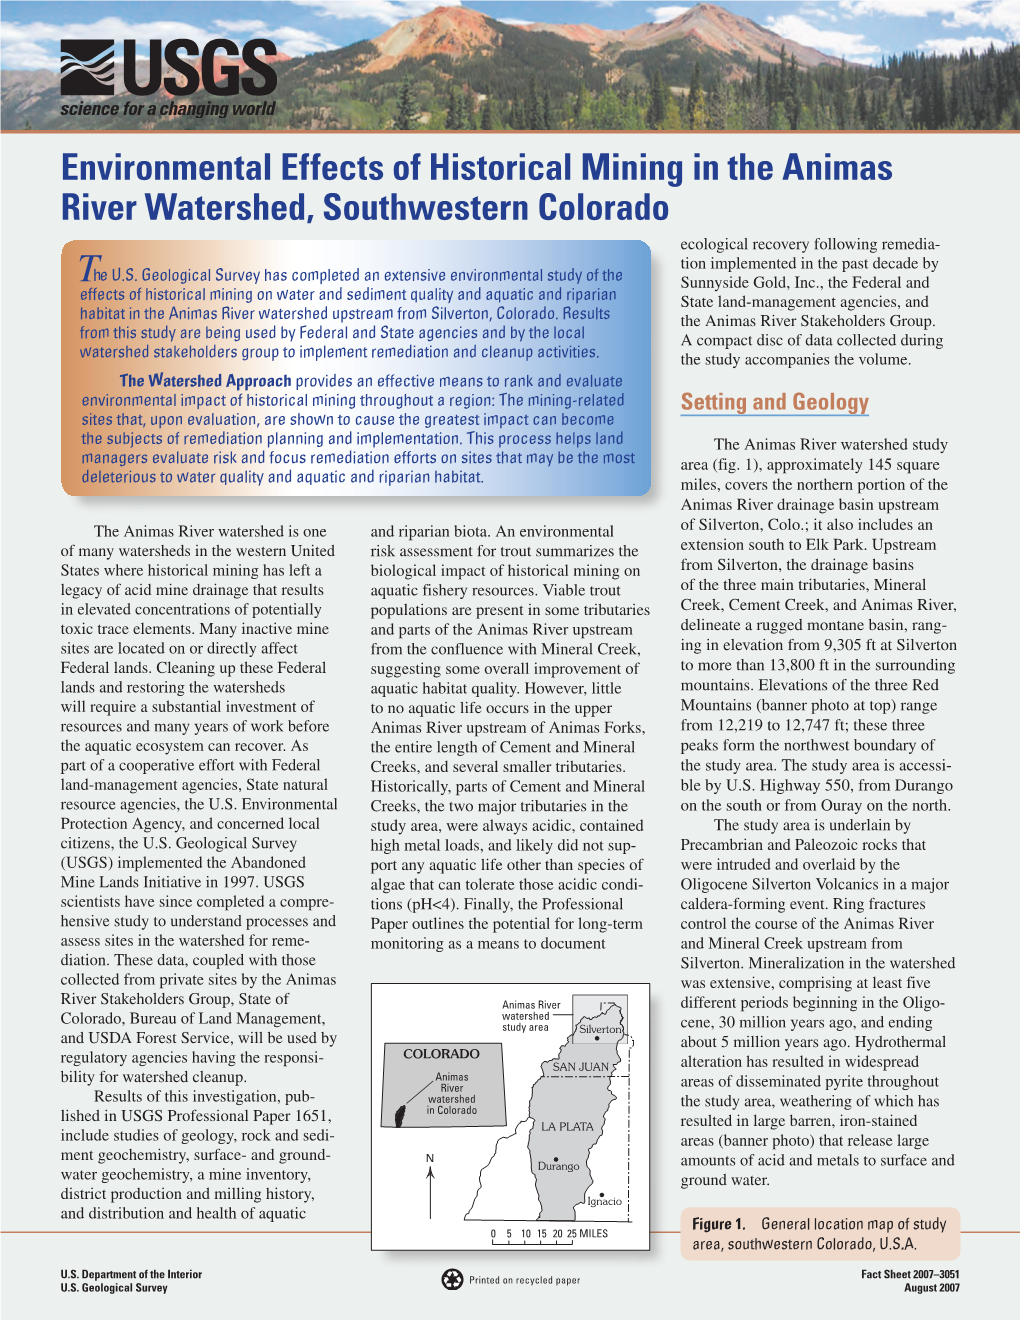 Environmental Effects of Historical Mining in the Animas River